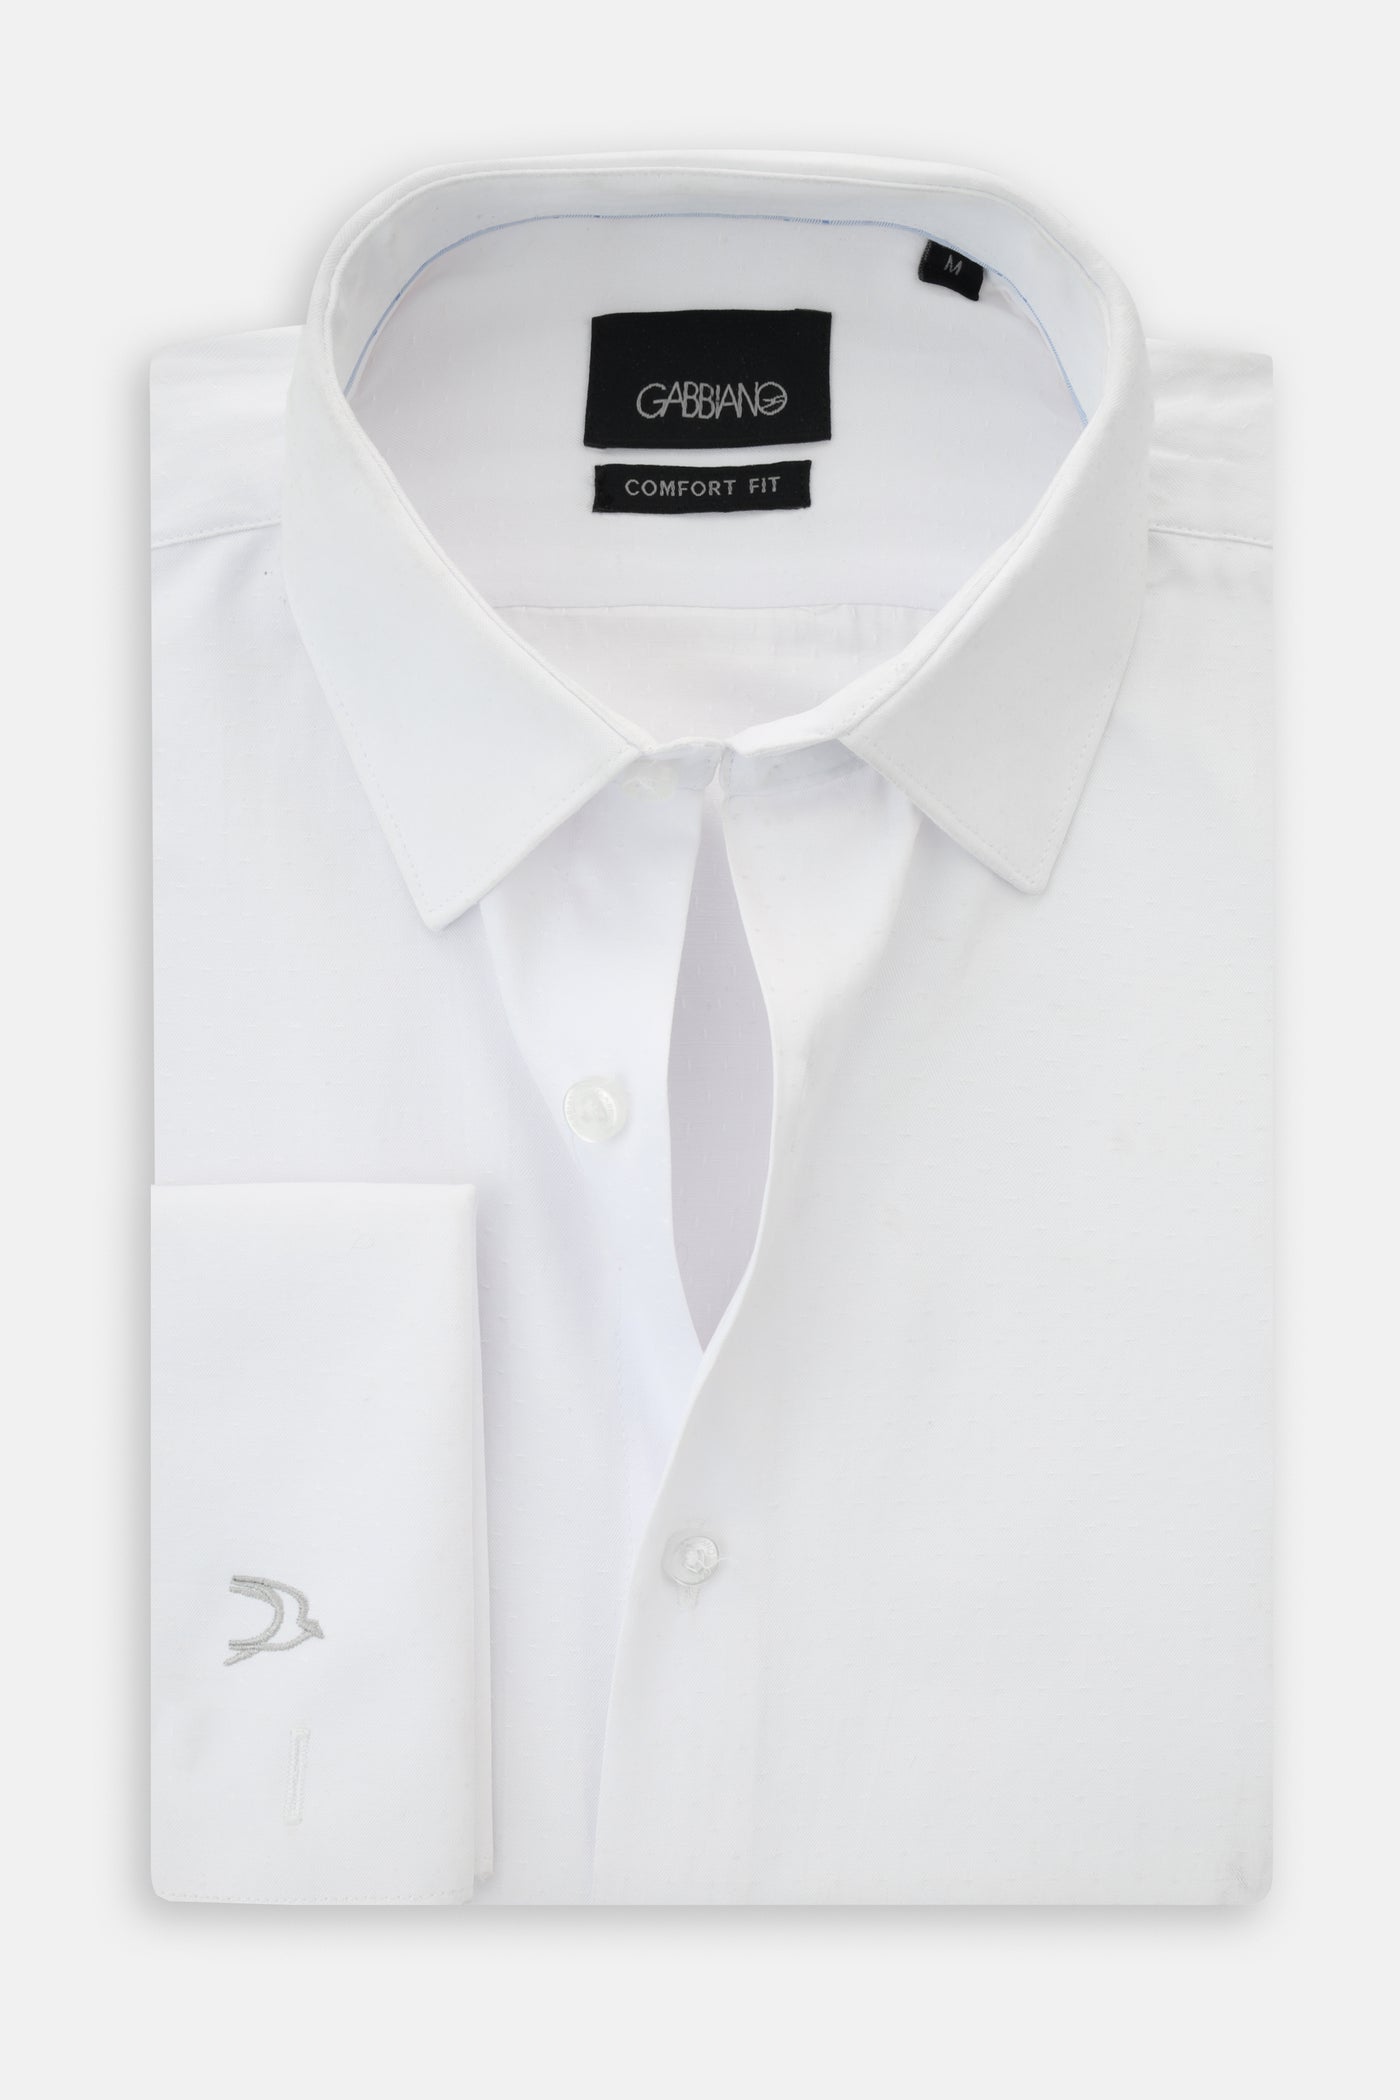 Solid White Classic Shirt